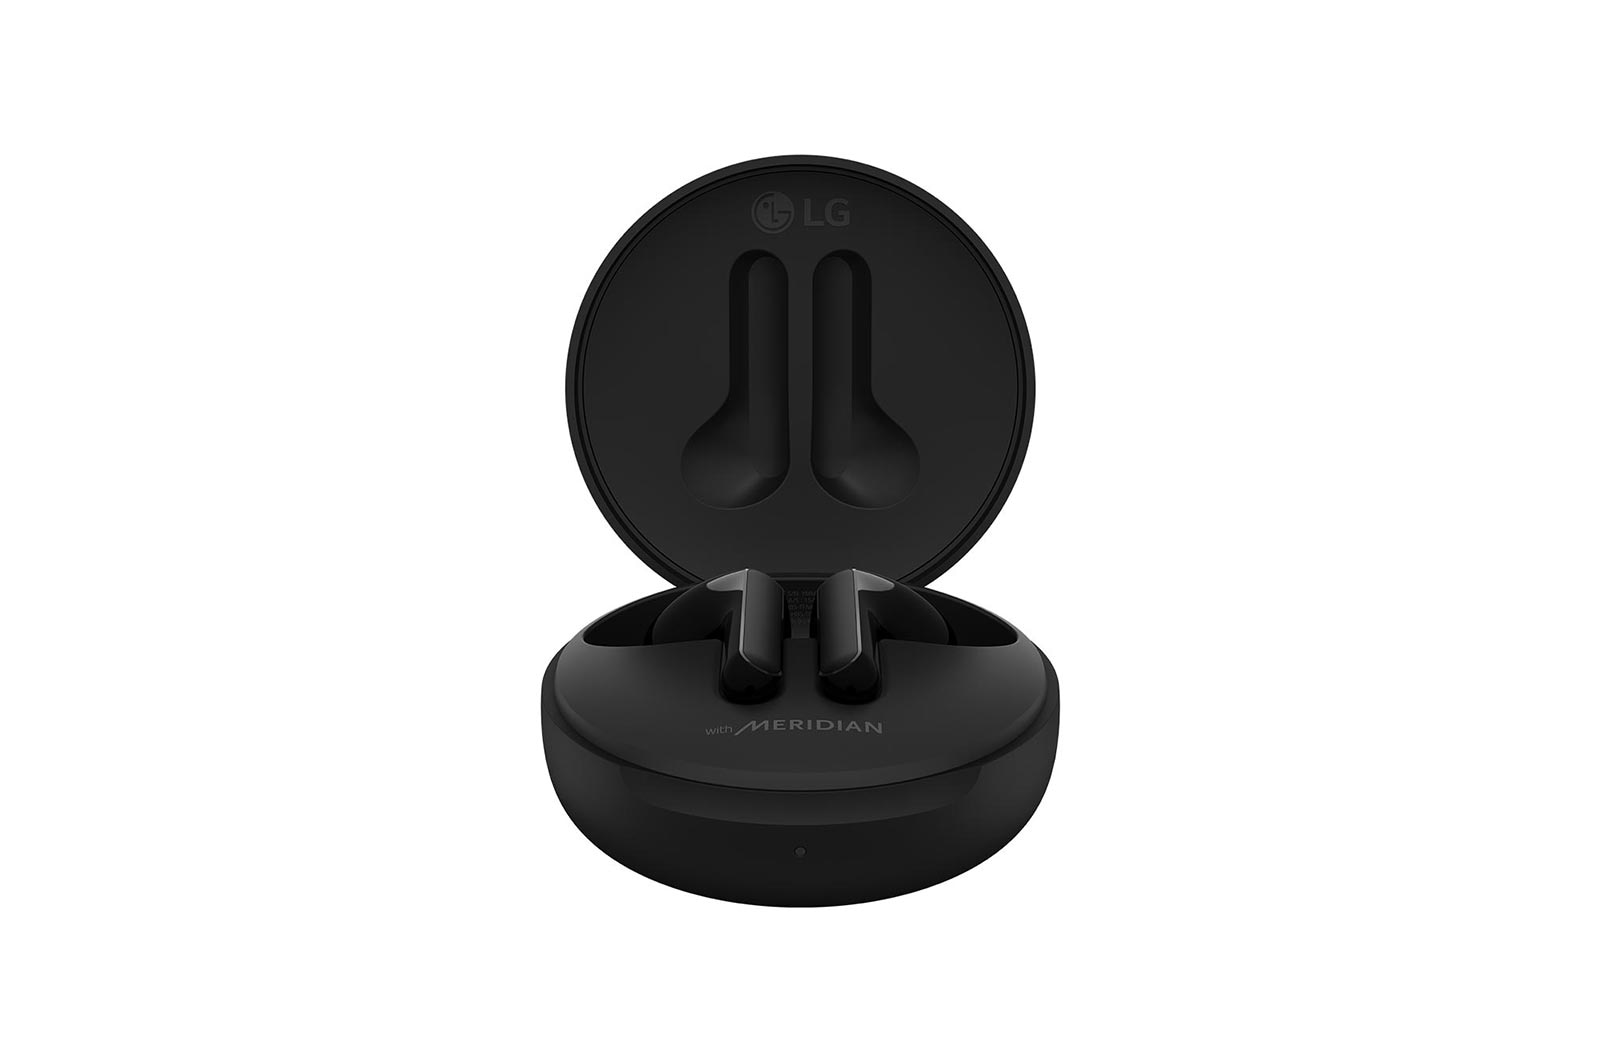 LG Wireless Earbuds Water Resistant and Sound Isolating - Black